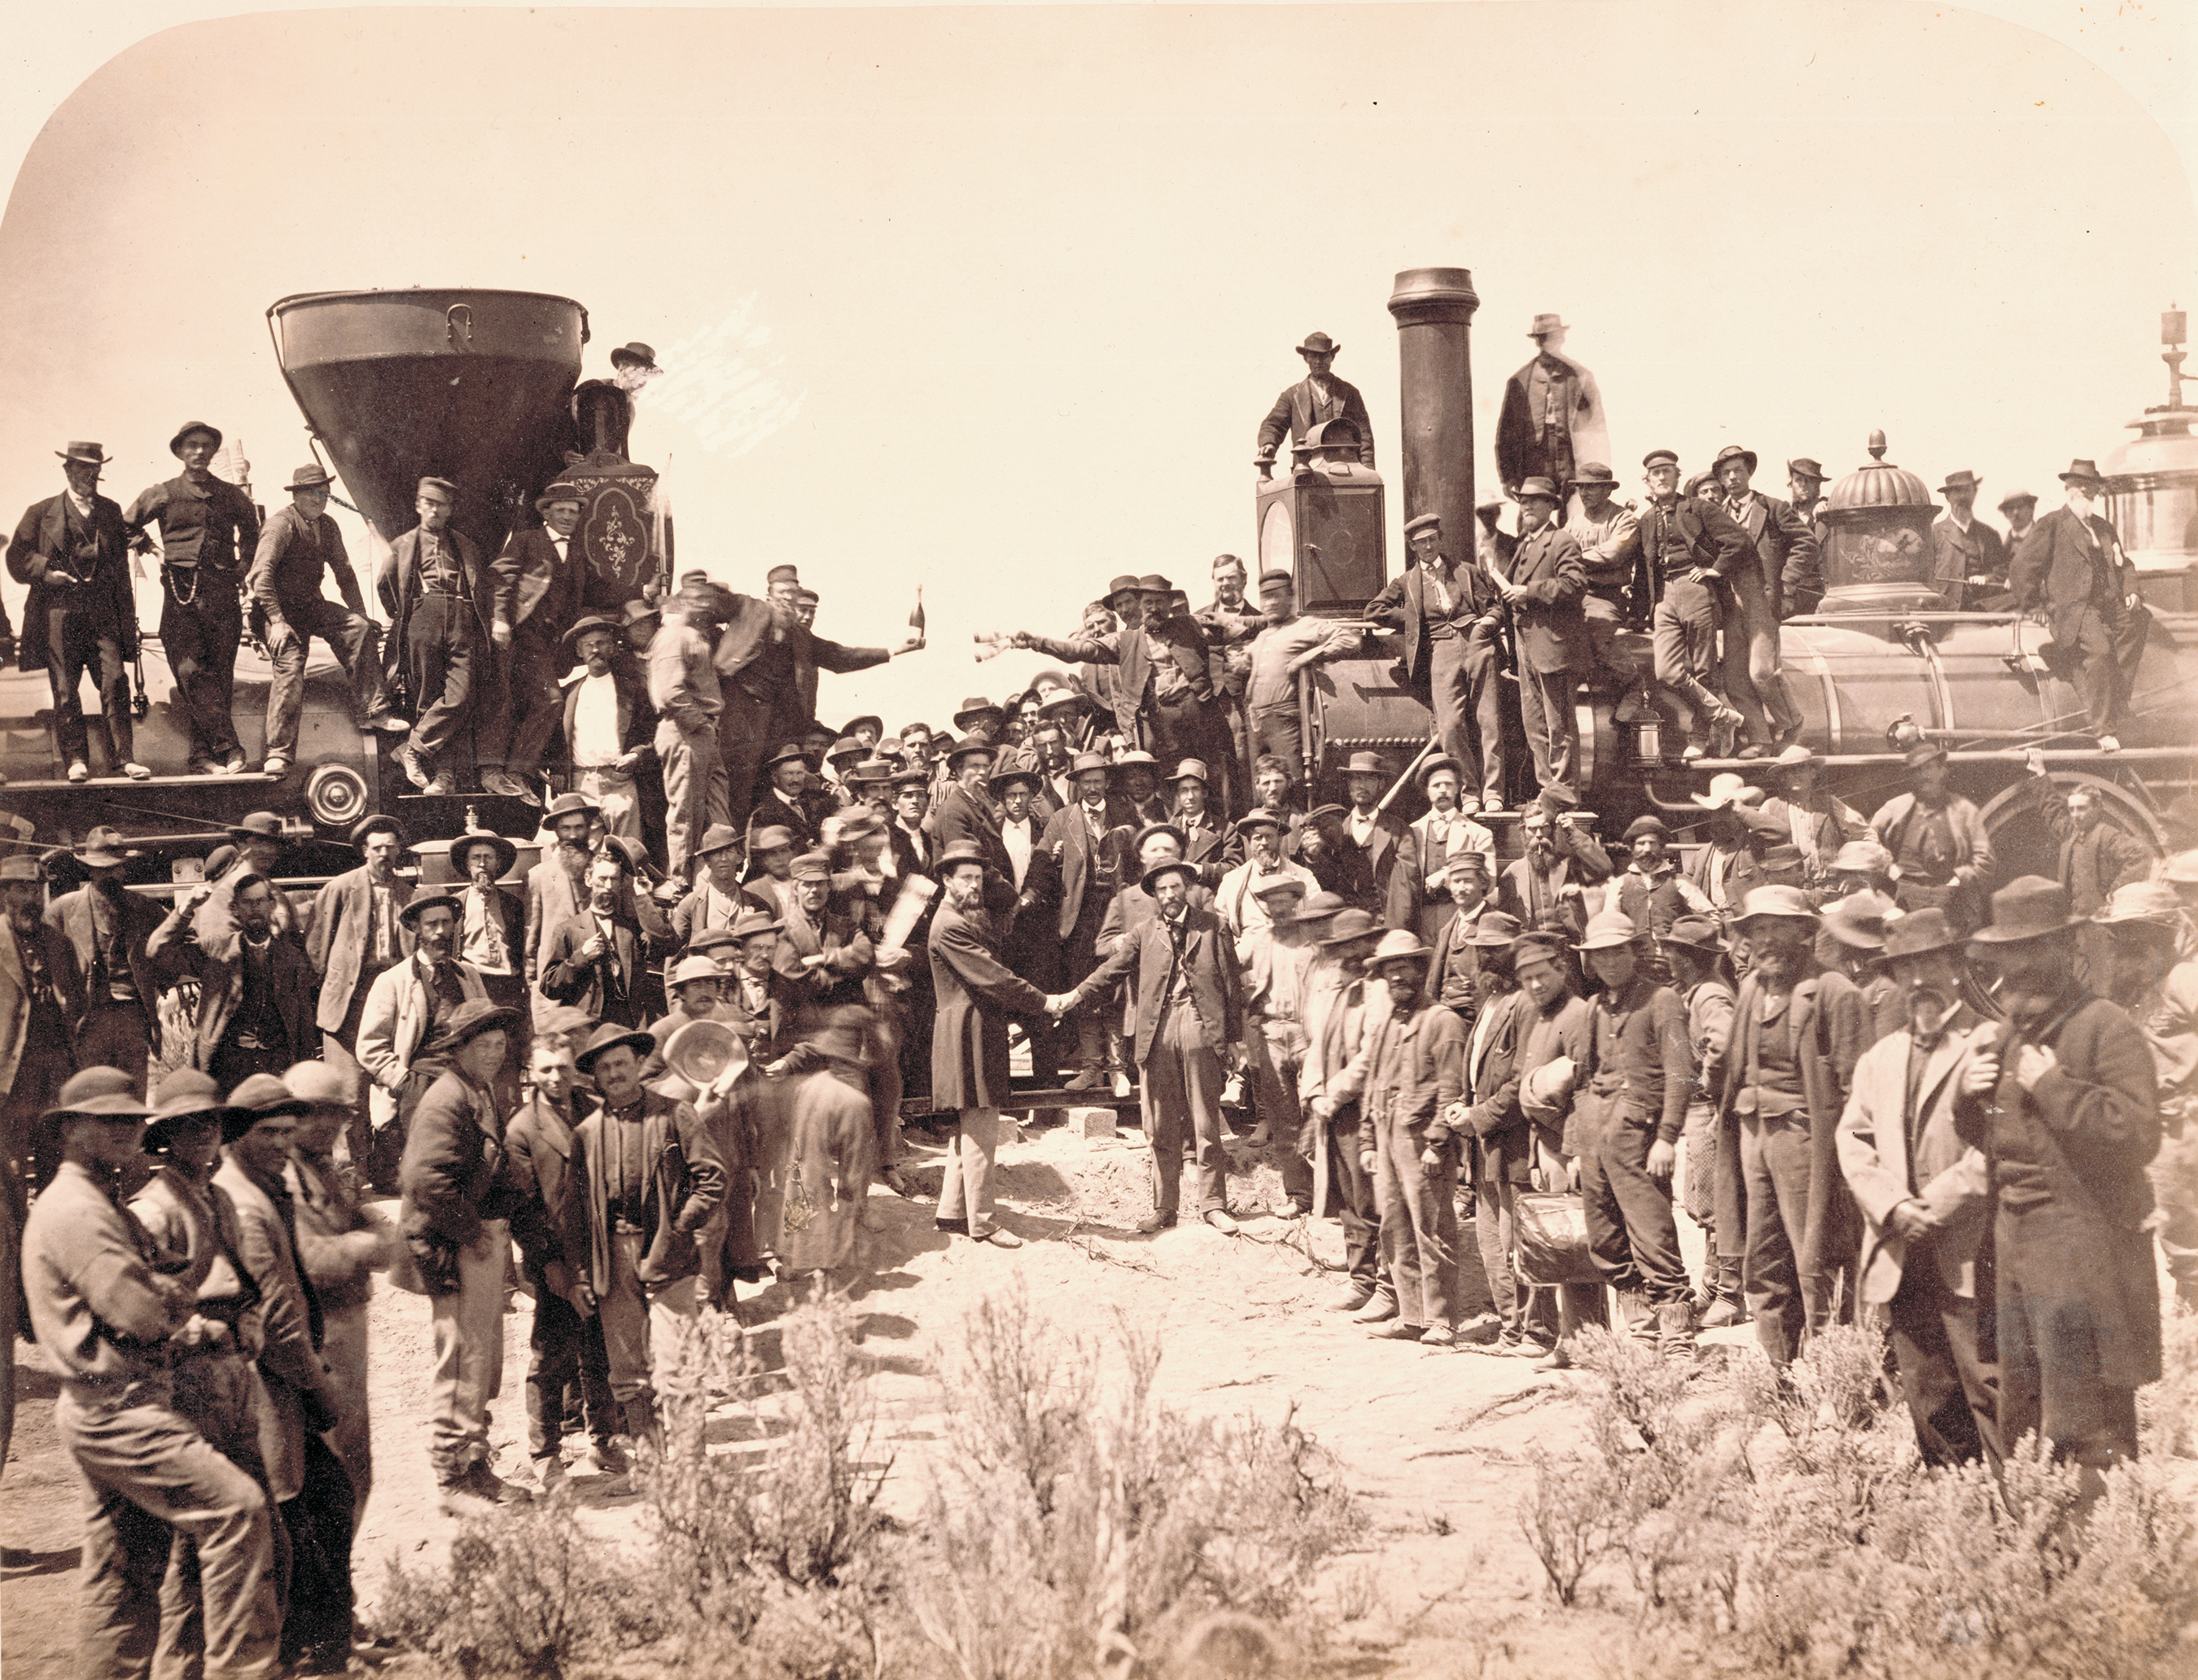 East and West shaking hands at laying of the last rail, Promontory Summit, Utah. Photograph was taken by Andrew Russell May 10, 1869. General Grenville Dodge, chief engineer for Union Pacific, is pictured shaking hands on the right with Central Pacific engineer Samuel Montague.